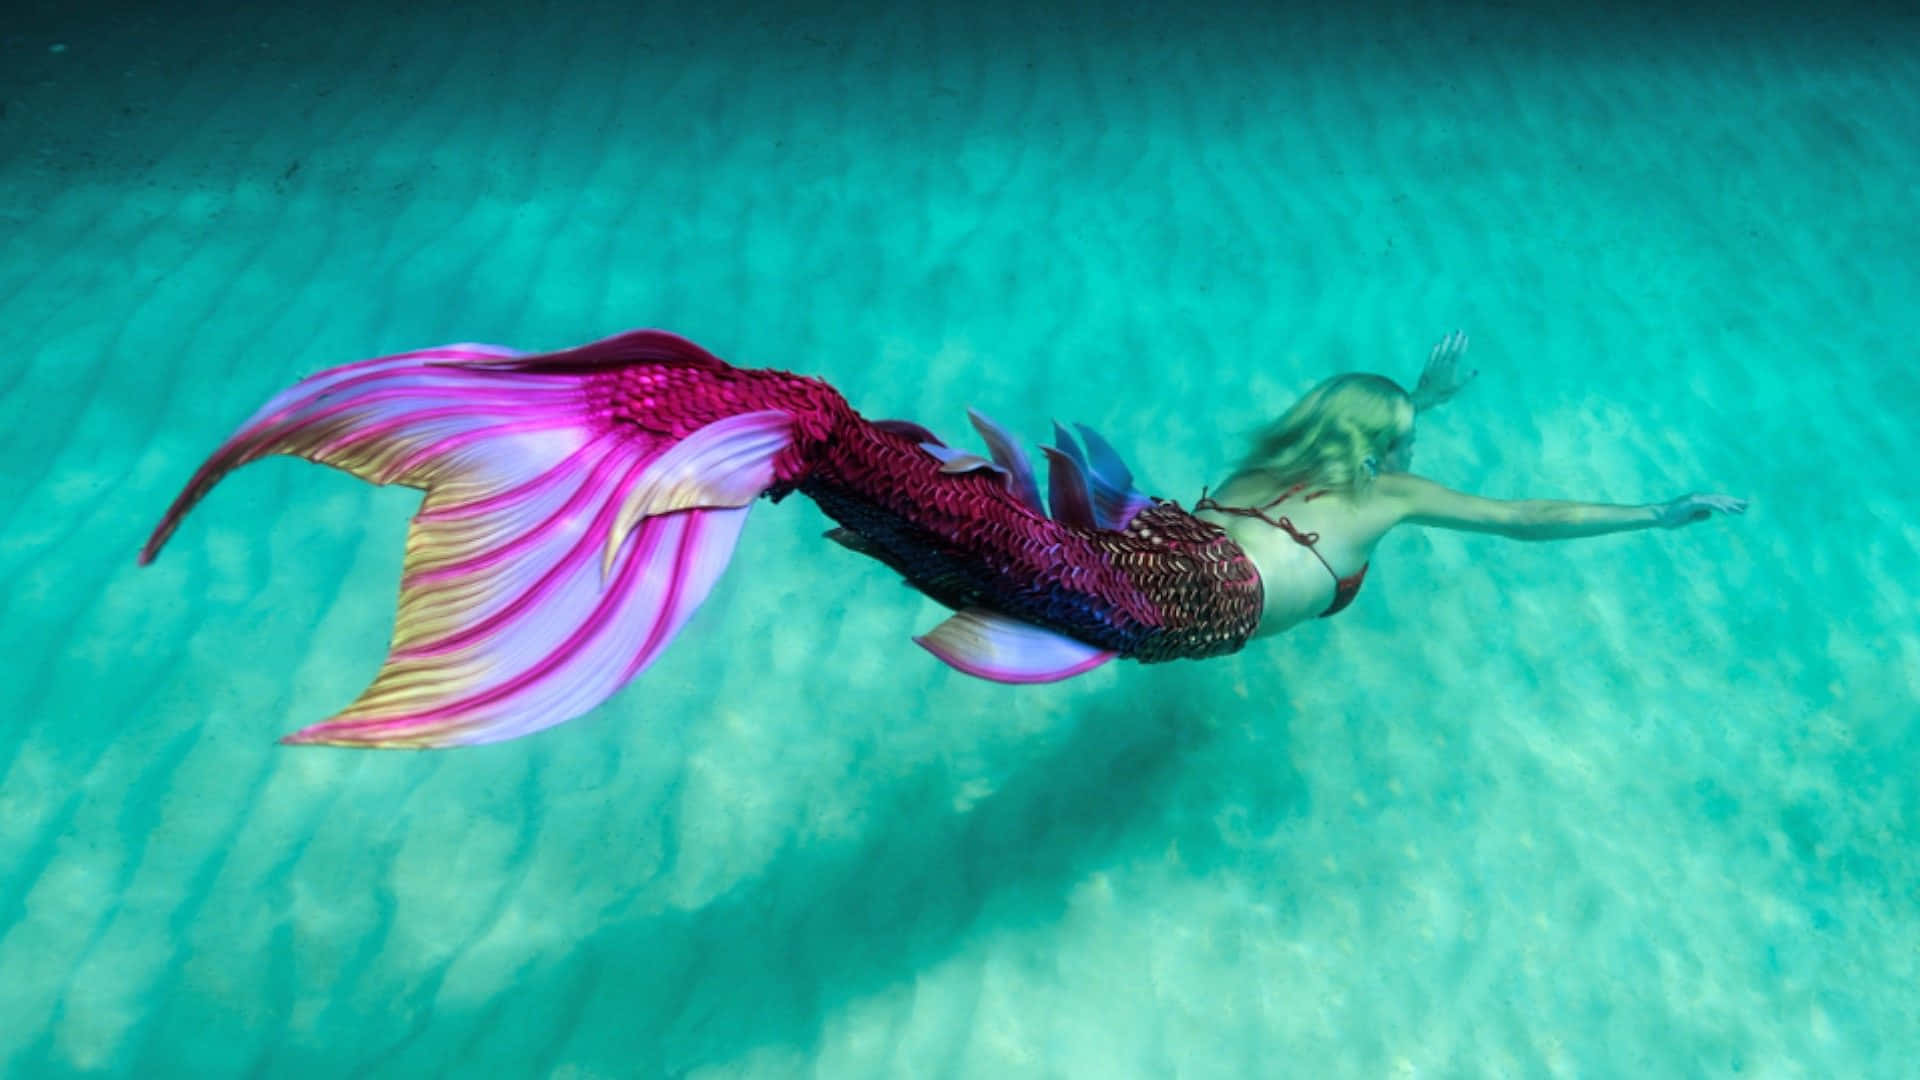 Mystical and Magical Underwater World of Mermaids